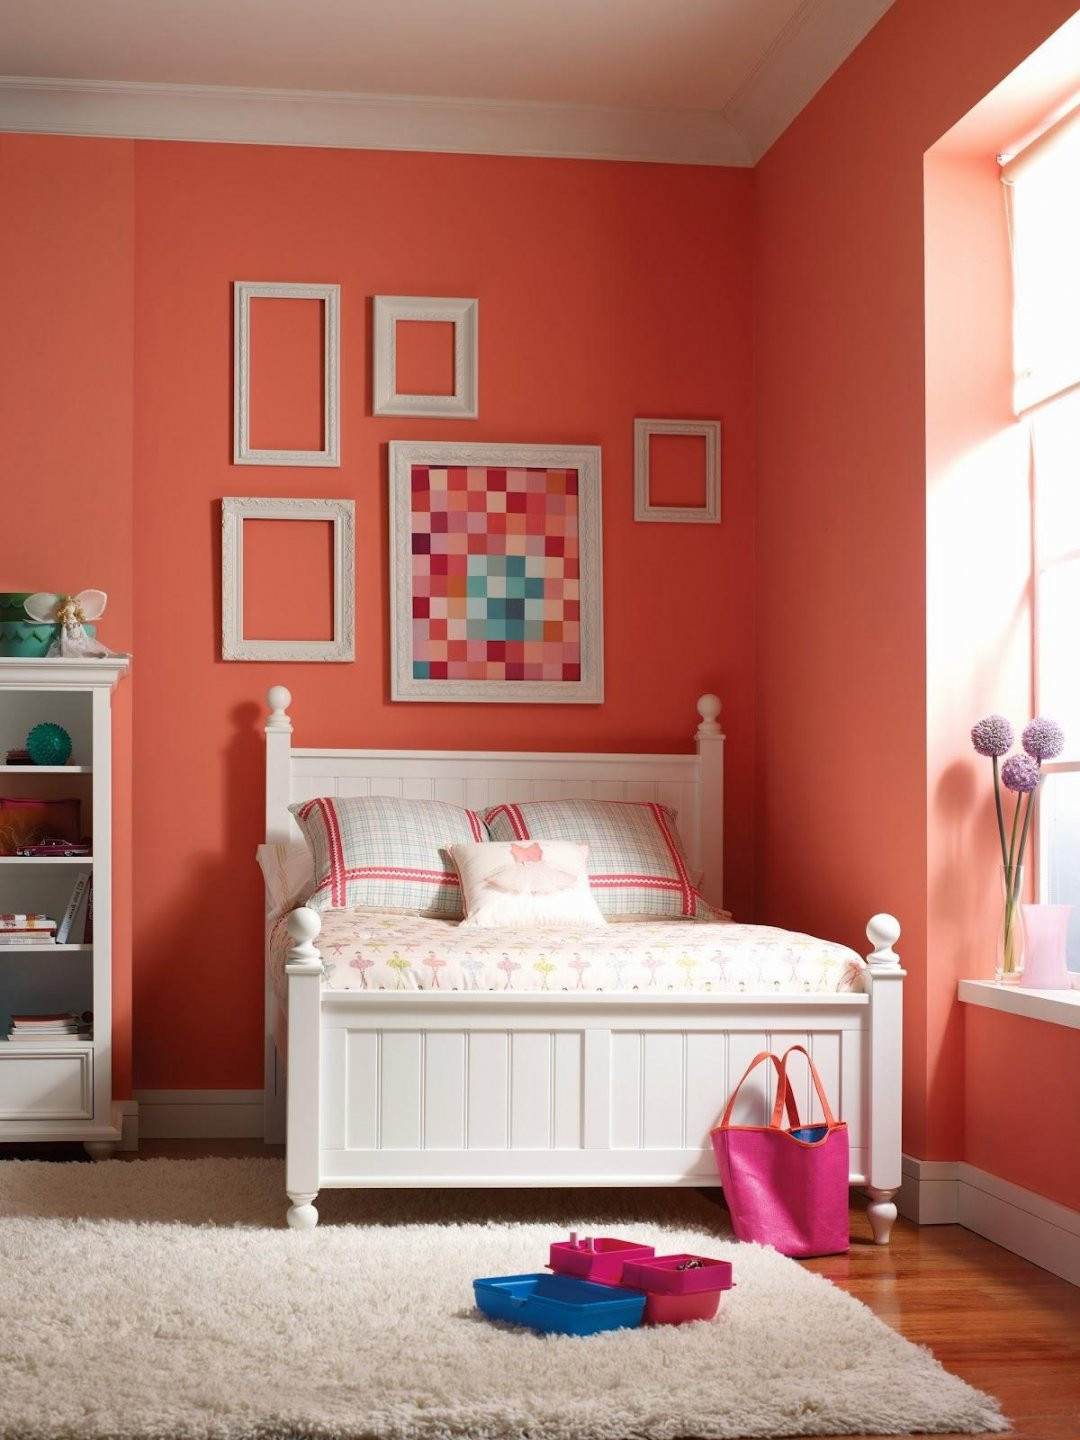 Paint Ideas For Small Bedroom
 50 Perfect Bedroom Paint Color Ideas for Your Next Project